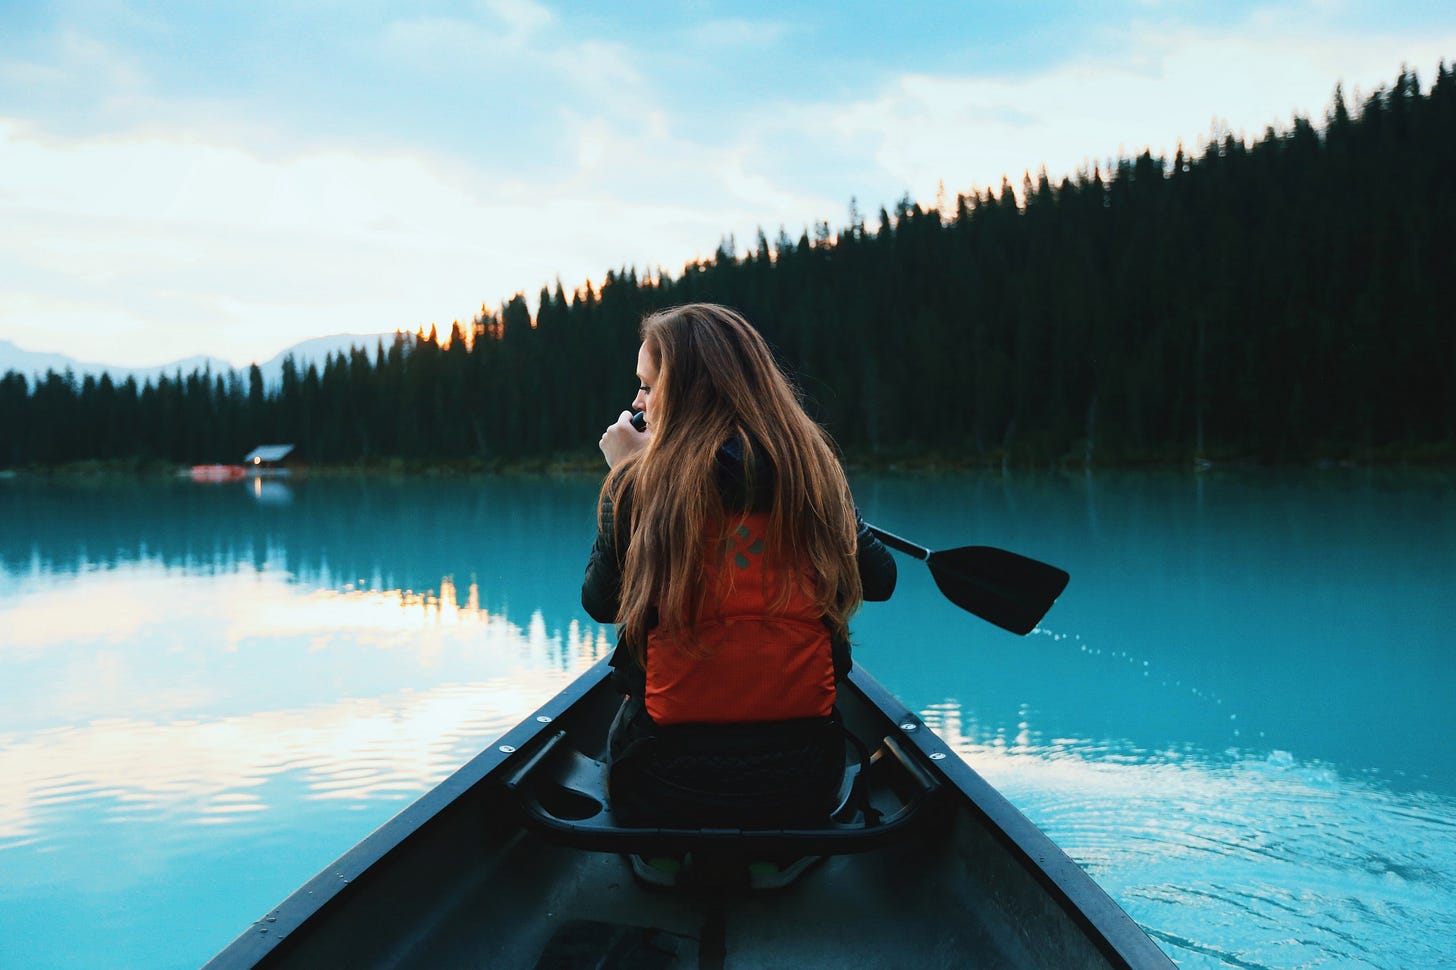 image of a girl in a canoe on a still lake for article by Larry G. Maguire